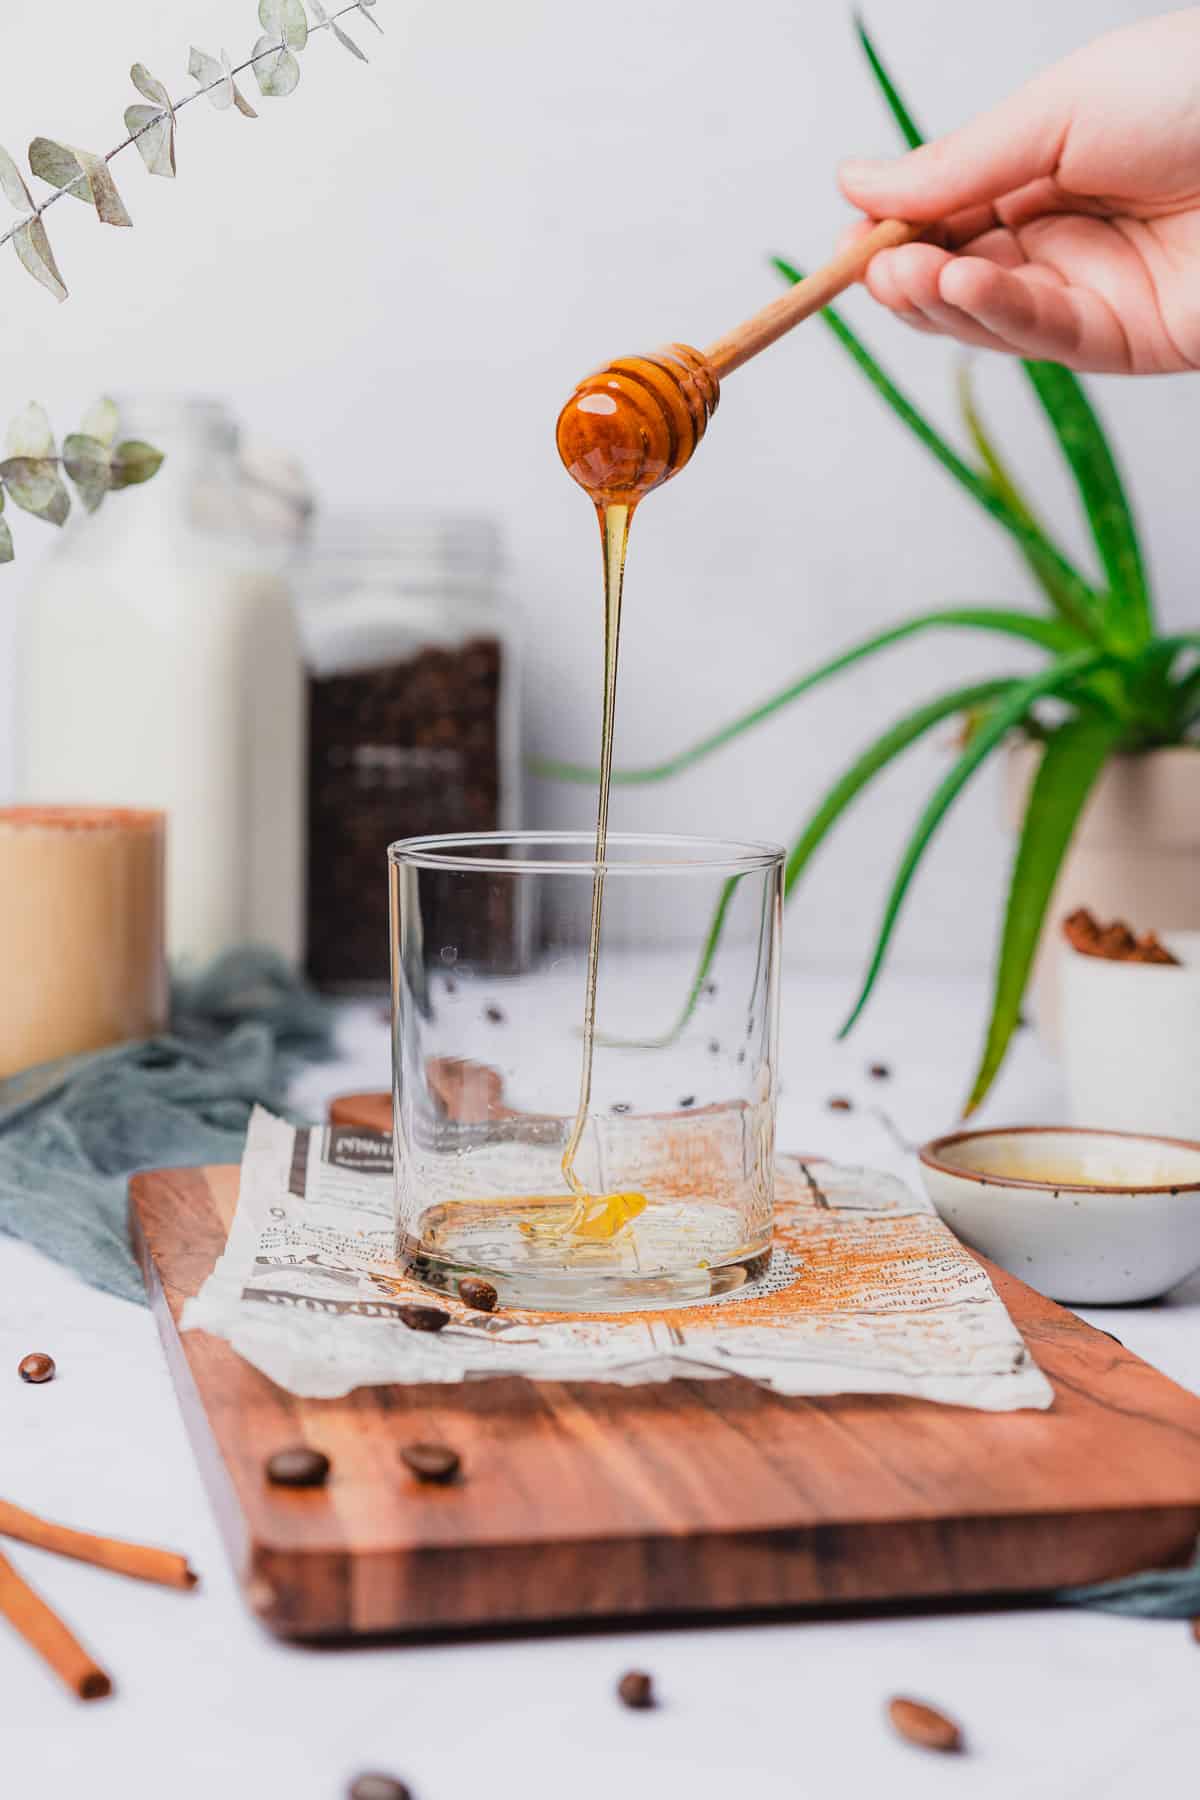 hand pouring honey into a glass surrounded by a plant and coffee making ingredients